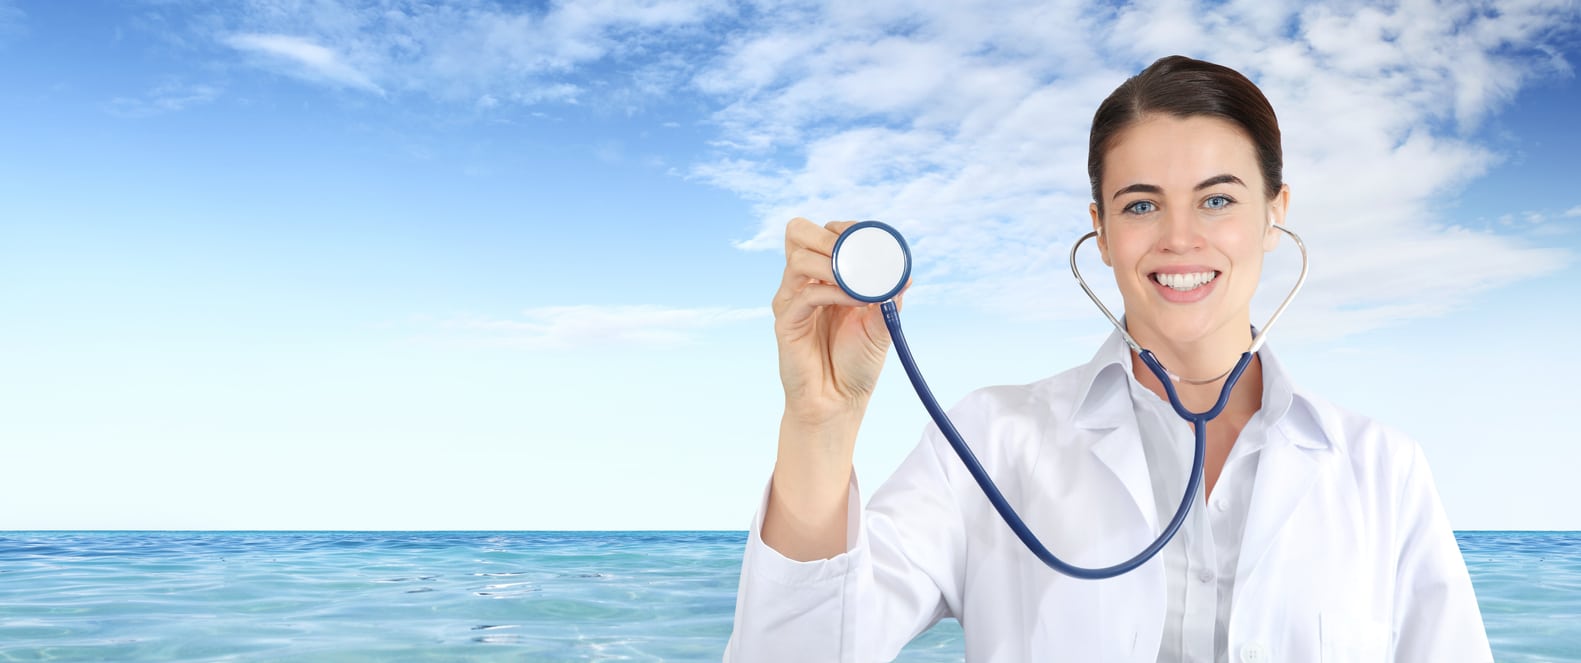 Considering Retiring to a Warmer Climate Pick up a Locum Tenens Assignment to Help Cover the Bill!